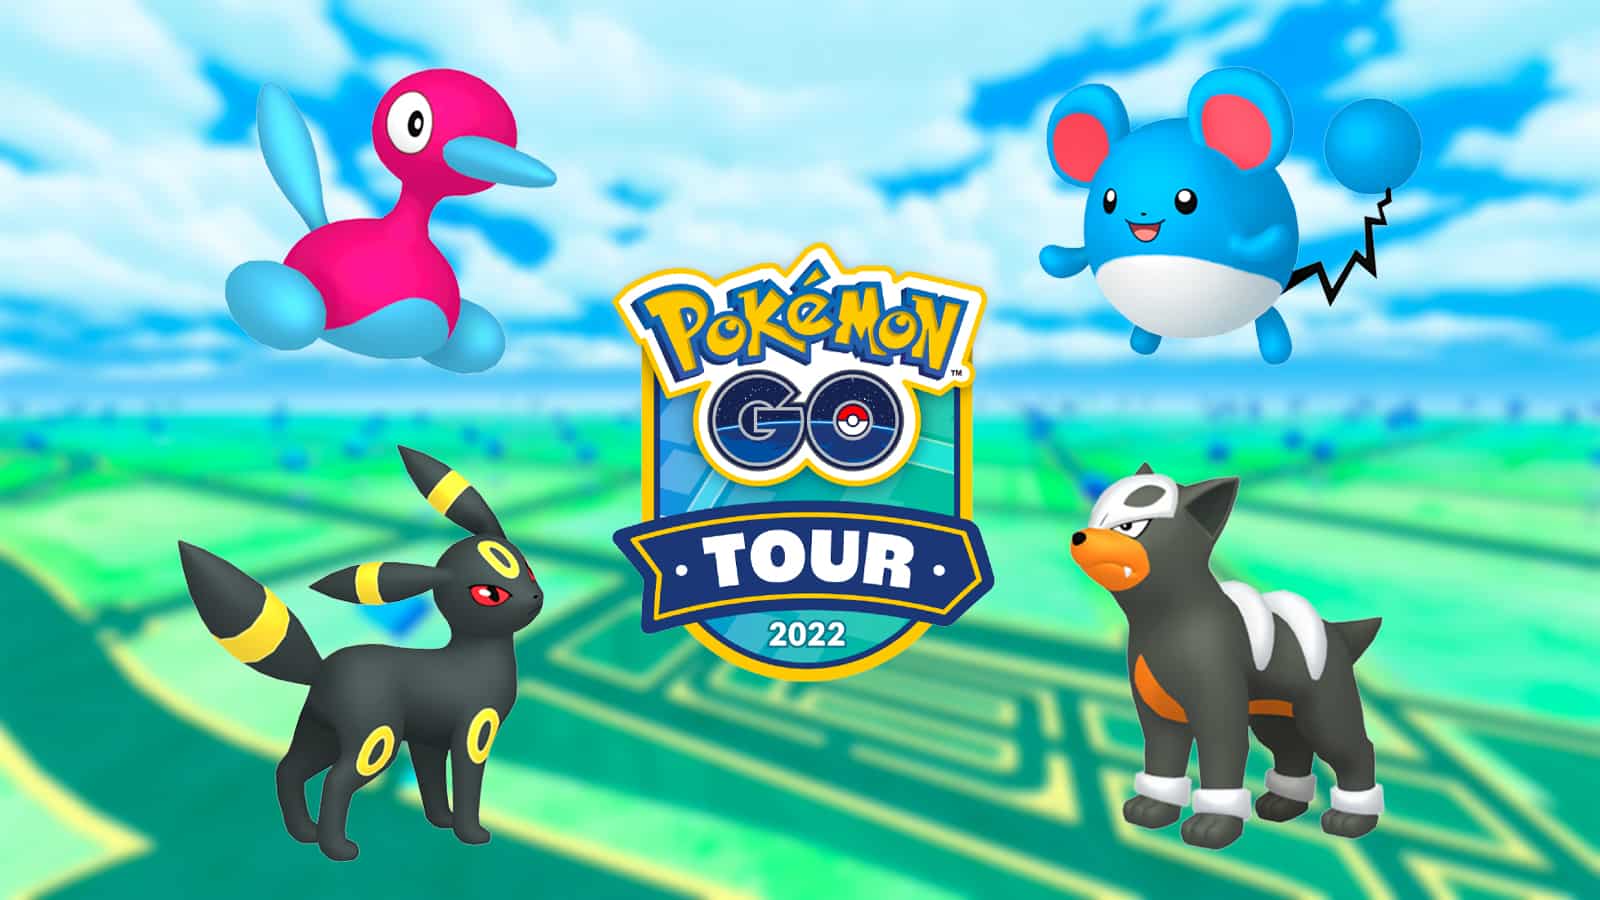 Massively on the Go: A guide to preparing for Pokemon Go's Johto Tour 2022